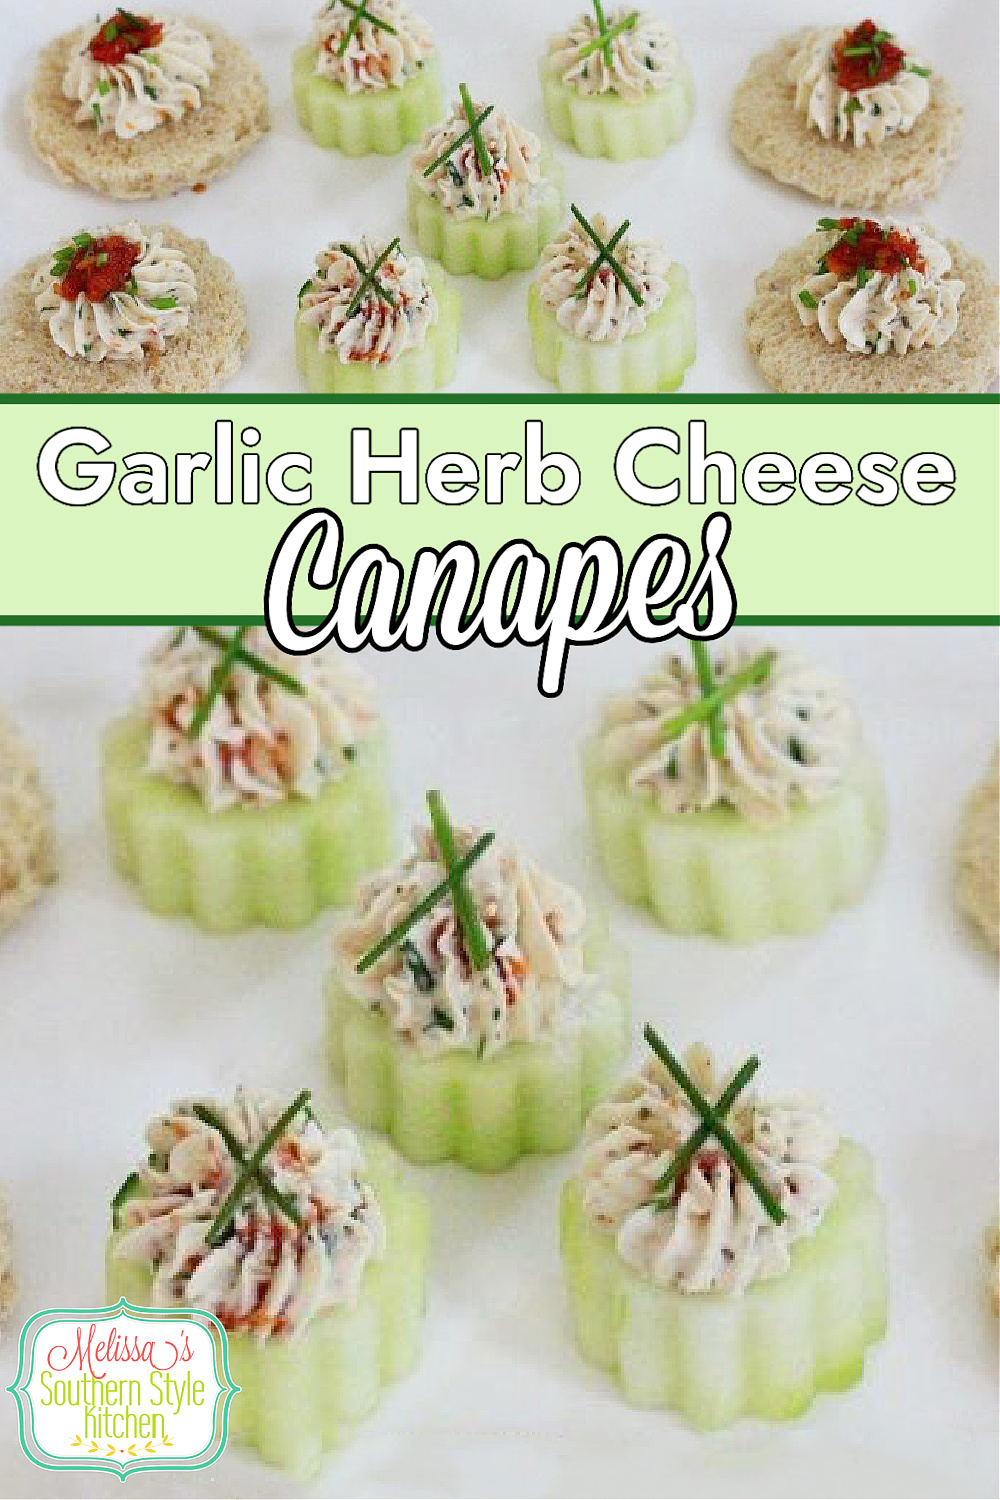 These no cook Garlic Herb Cheese Canapes with fresh Chives and sundried tomatoes are a snap to assemble and can be made low carb, too! #garlicherb #canapes #cucumberbites #lowcarbappetizers #garlicherbcheese #smallbites #southernstyle #appetizerrecipes #cucumbers via @melissasssk